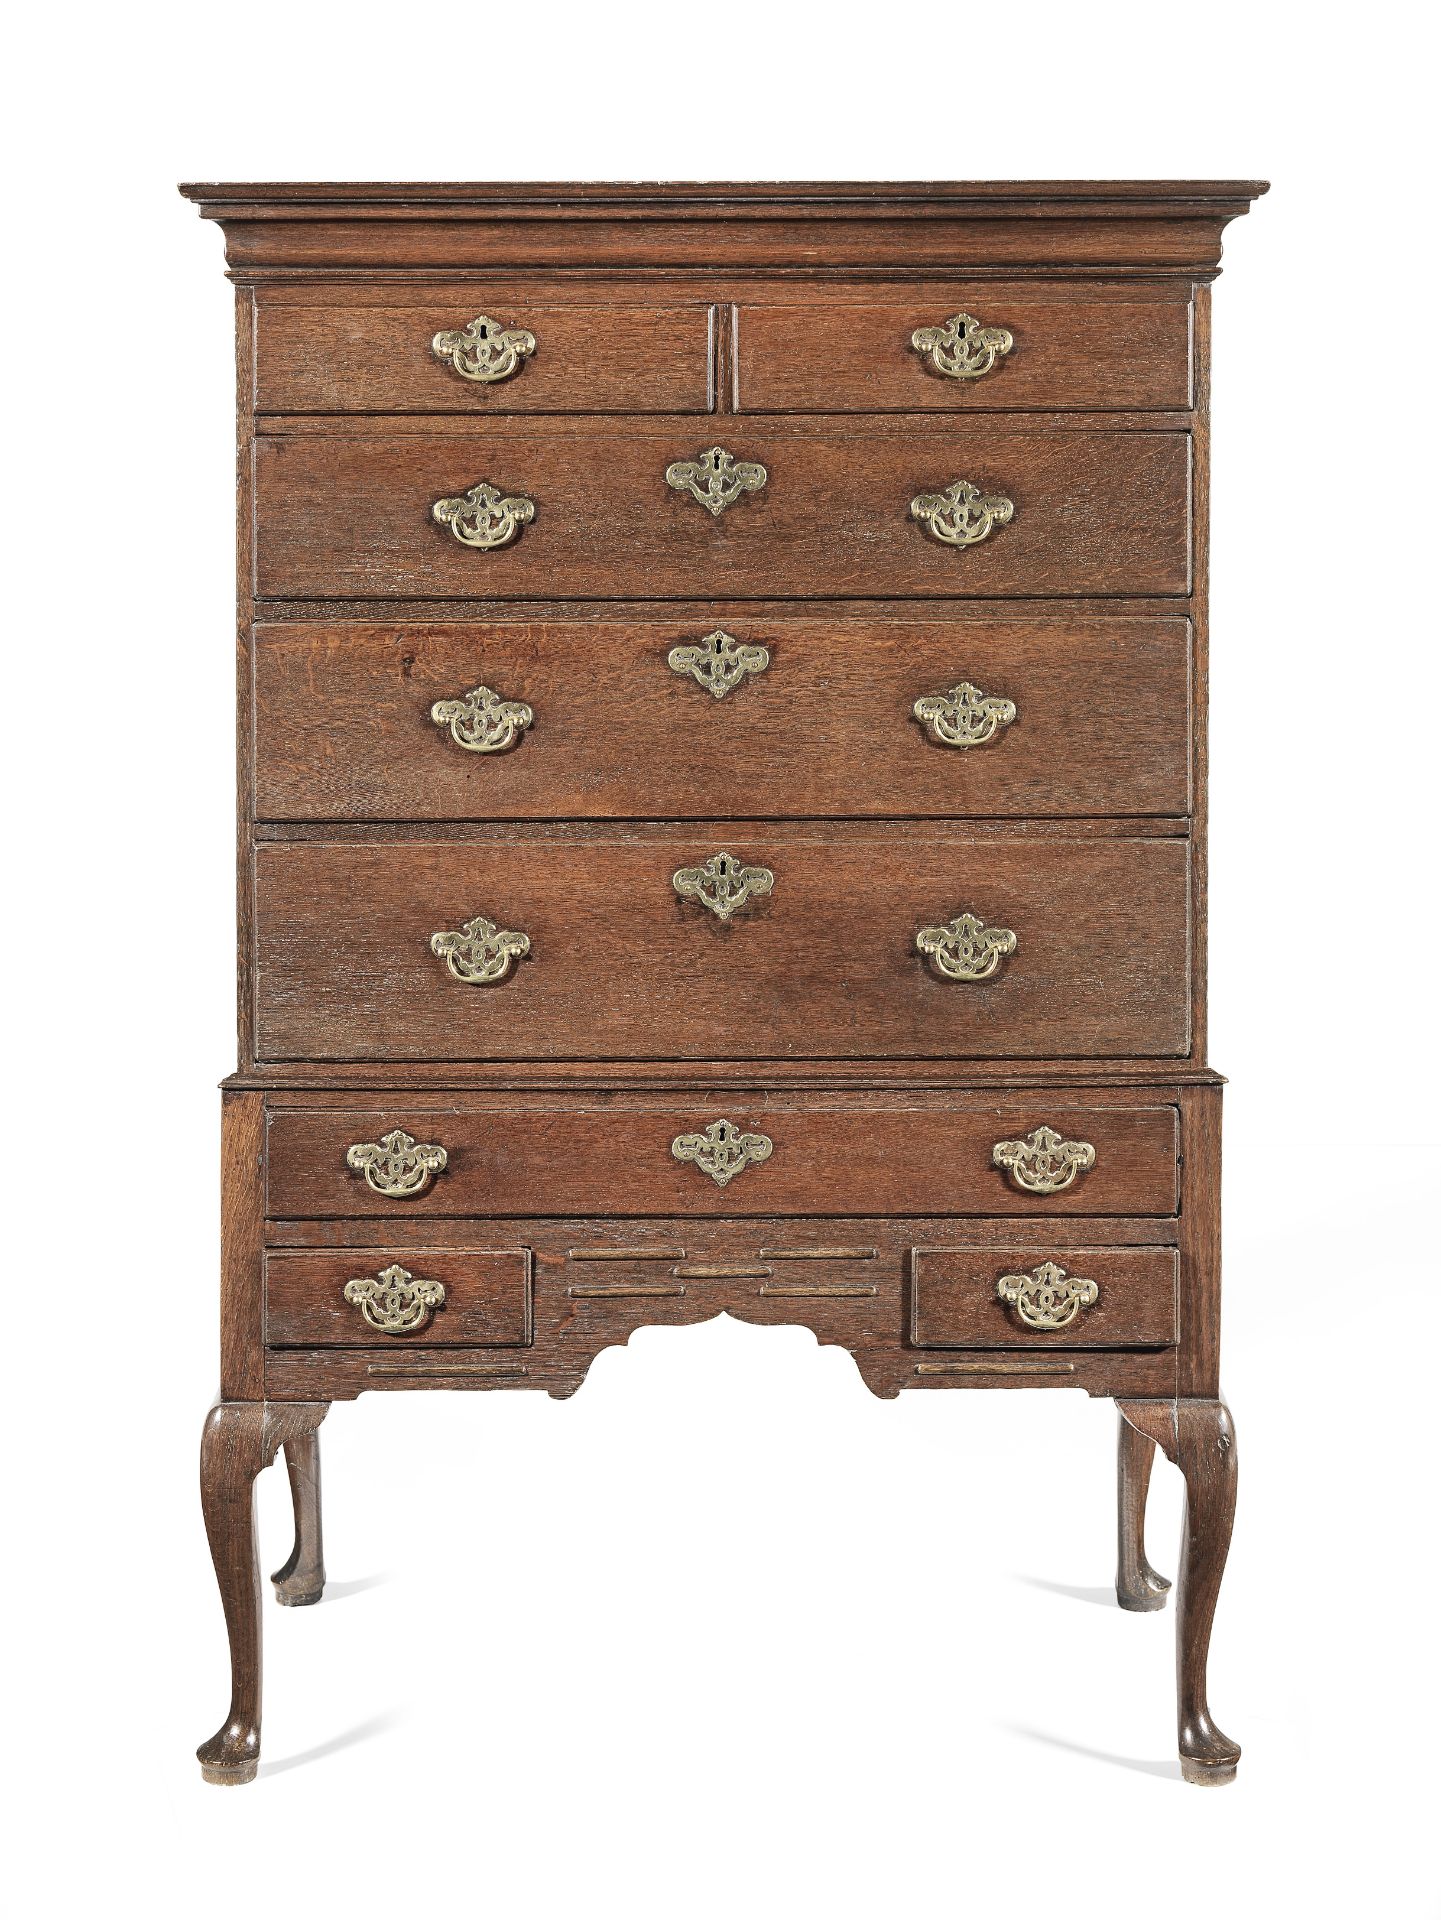 A George II joined oak chest-on-stand, circa 1730-50